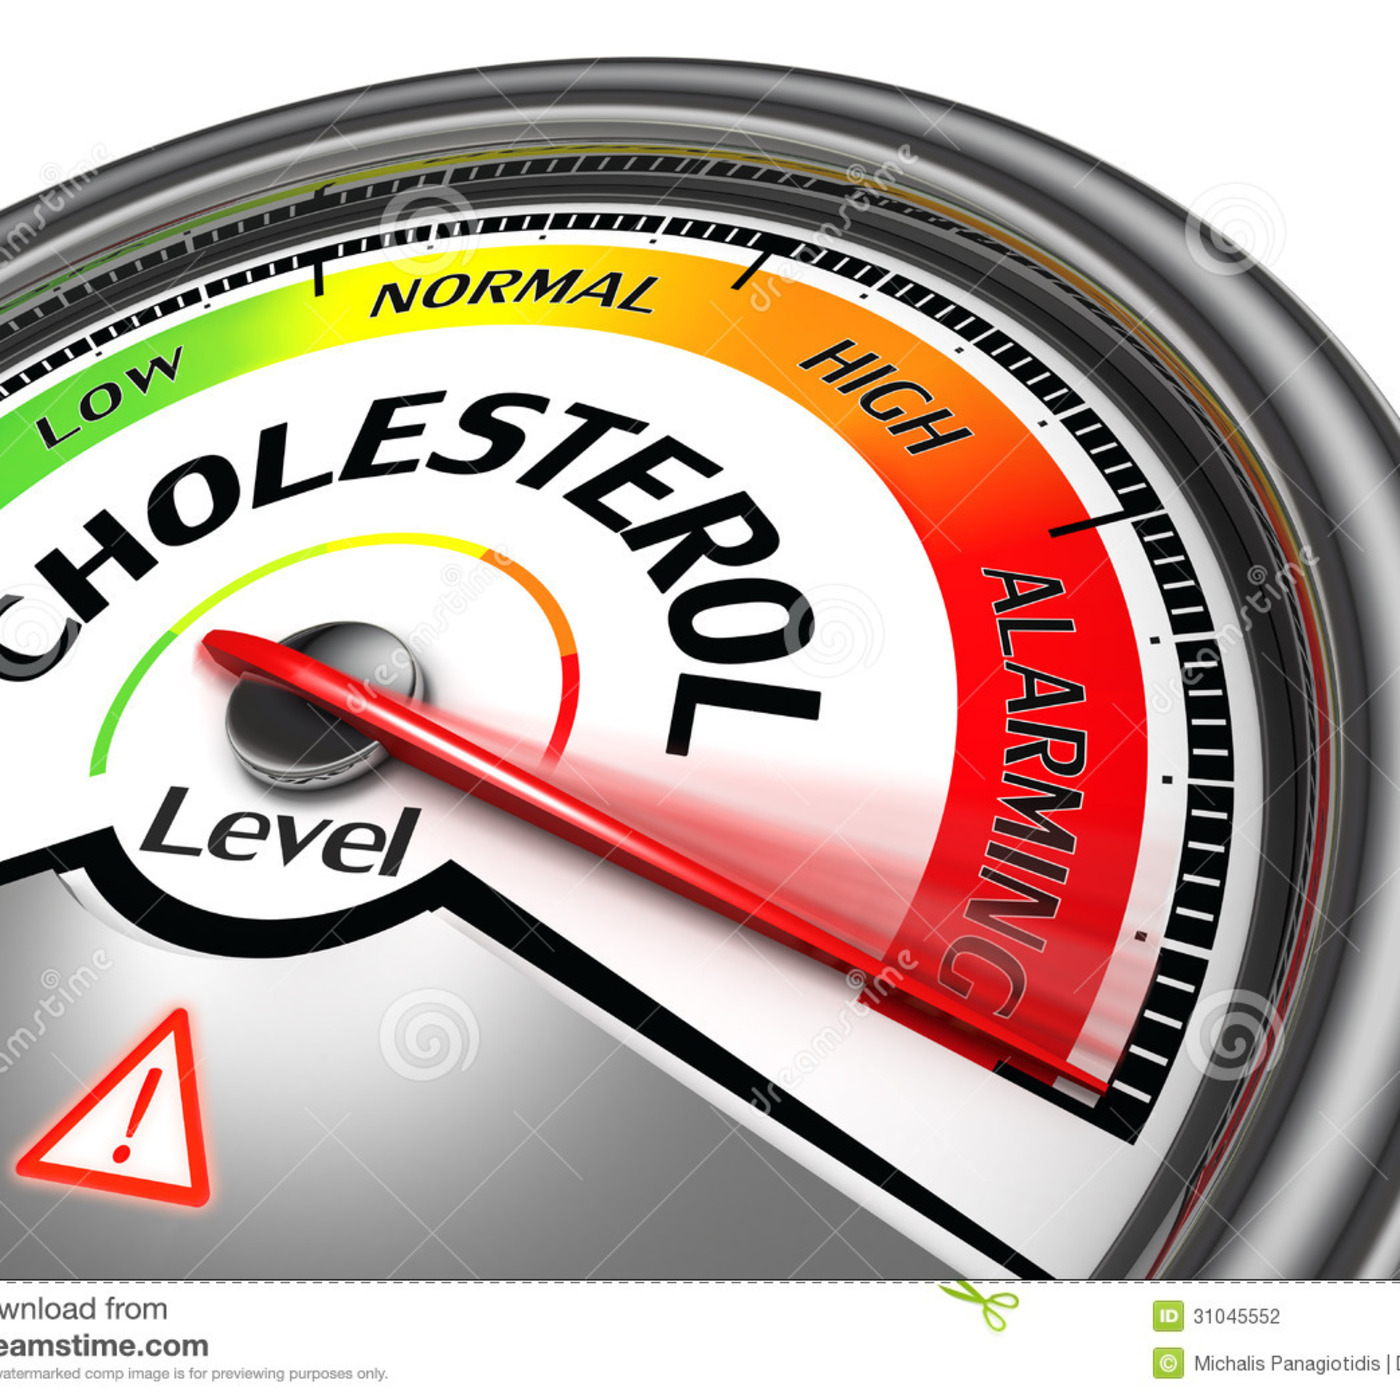 New Guidelines for Cholesterol